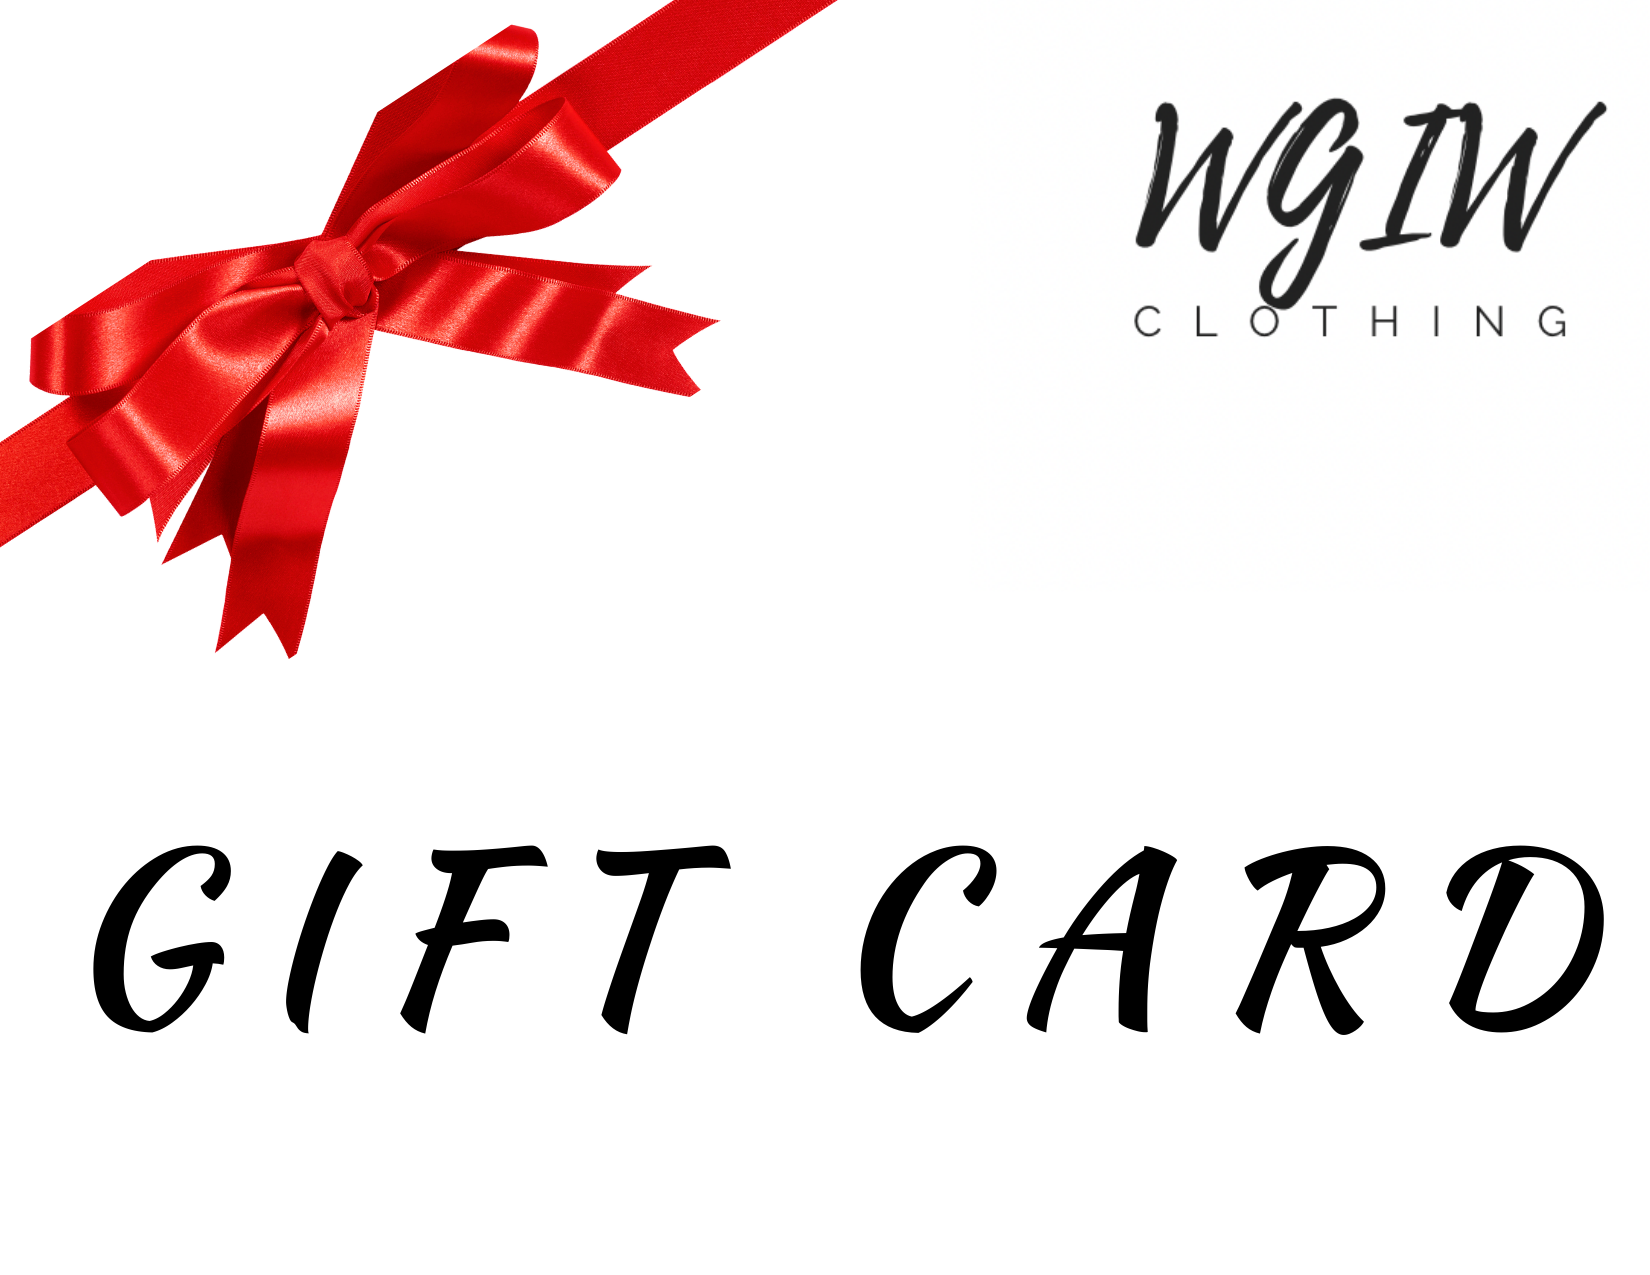 With God I Win! Clothing Gift Card